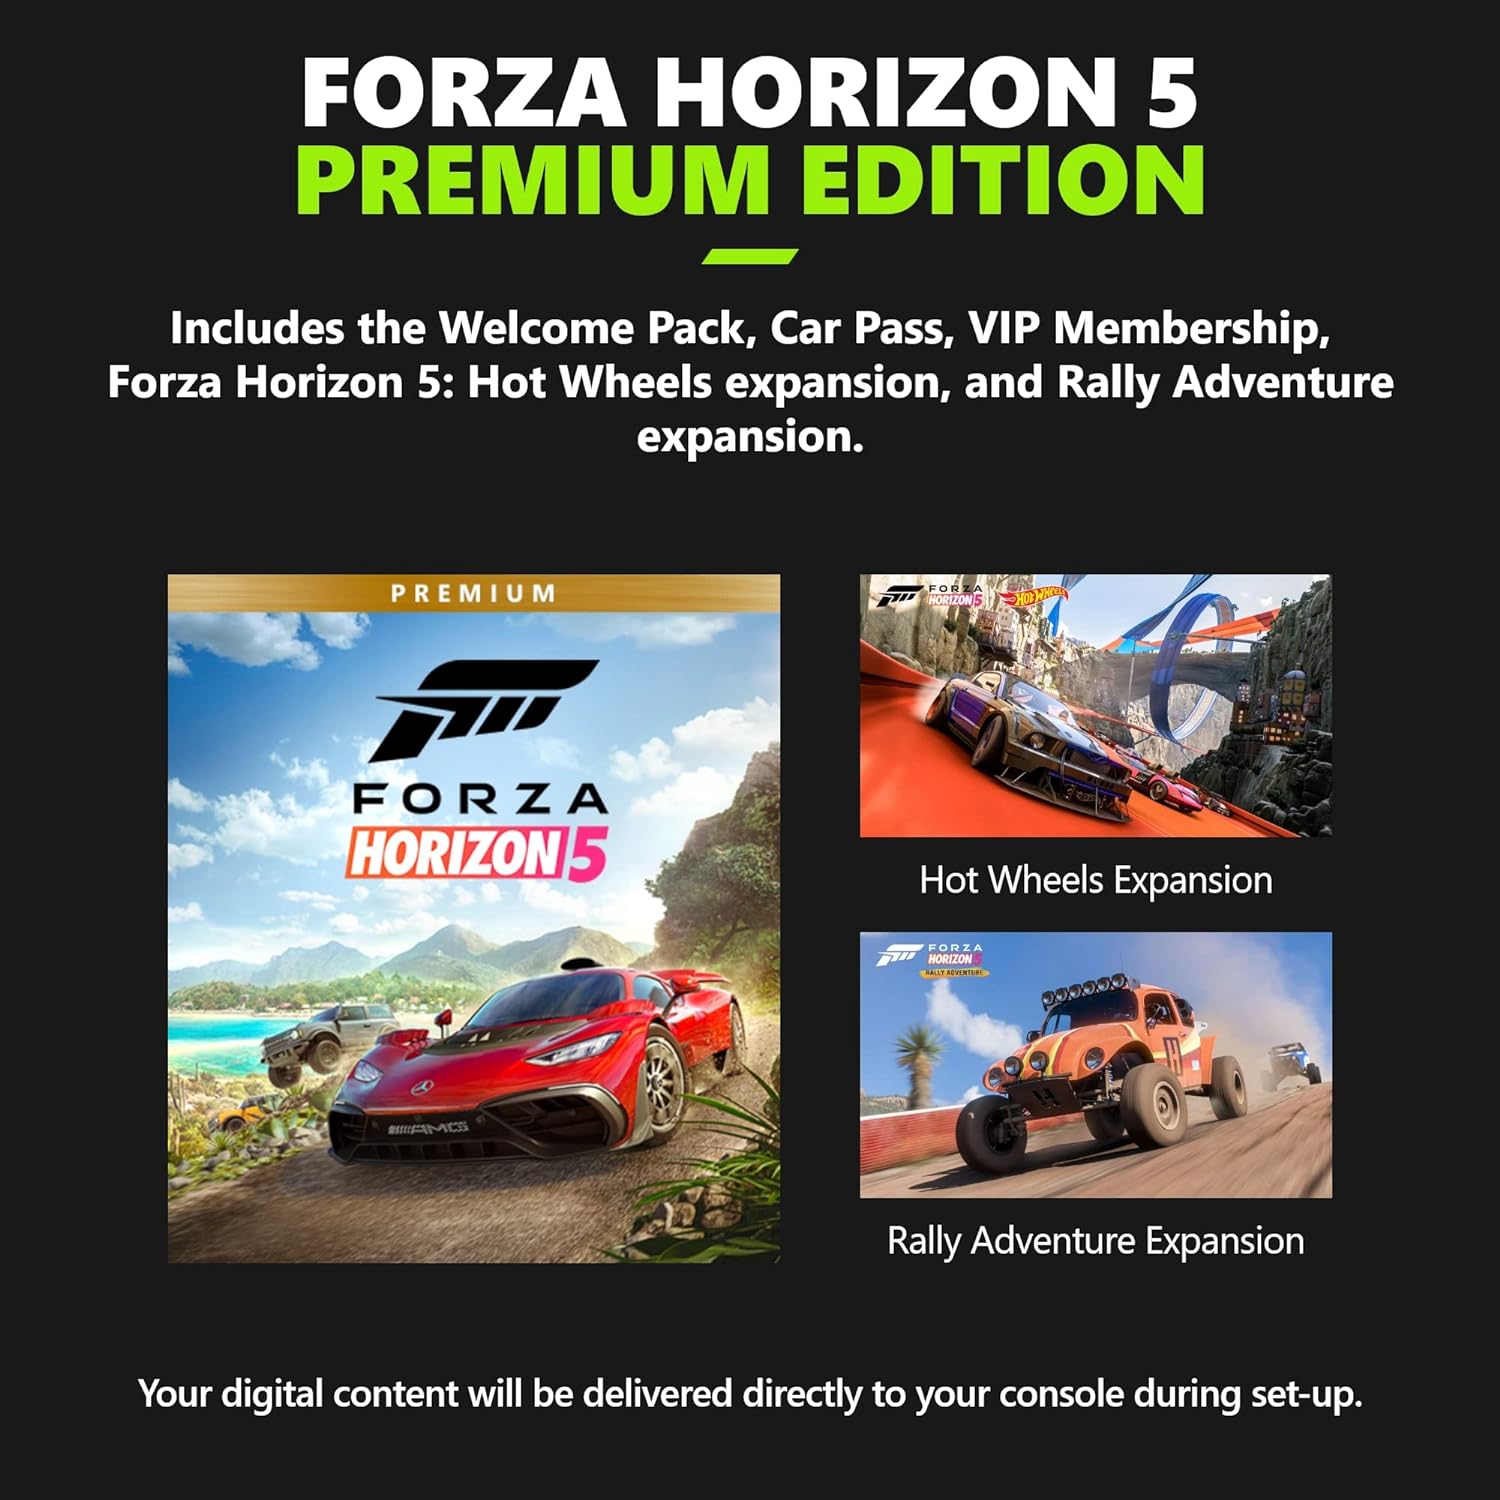 Xbox Series X 1TB SSD Forza Horizons 5 Console Bundle - Includes Xbox Wireless Controller - Includes Forza Horizons 5 - 16GB RAM 1TB SSD - Experience True 4K Gaming - Xbox Velocity Architecture